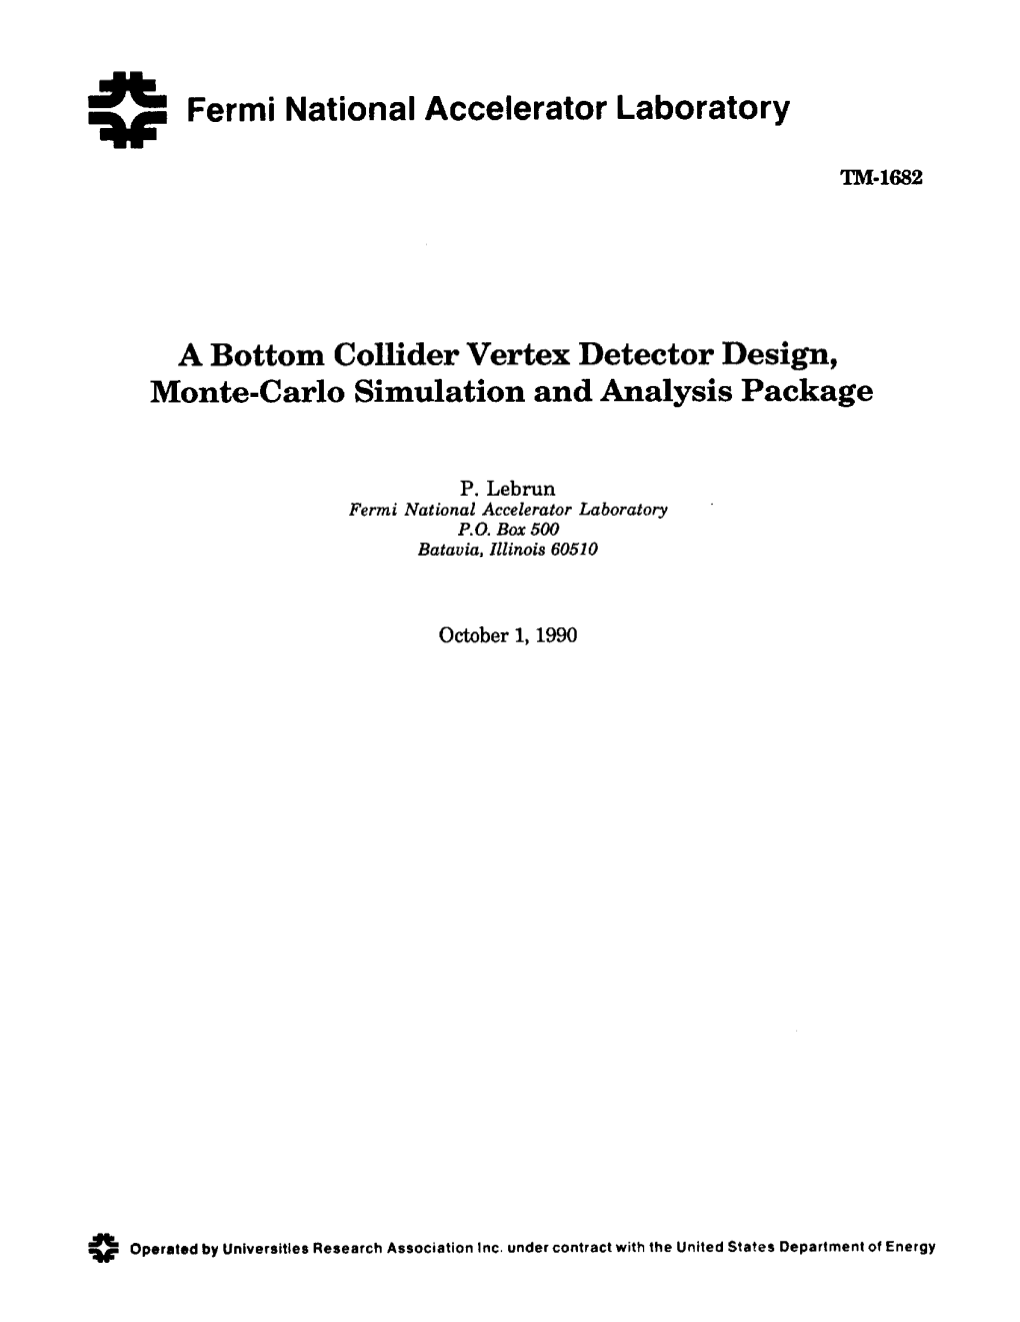 A Bottom Collider Vertex Detector Design, Monte-Carlo Simulation and Analysis Package